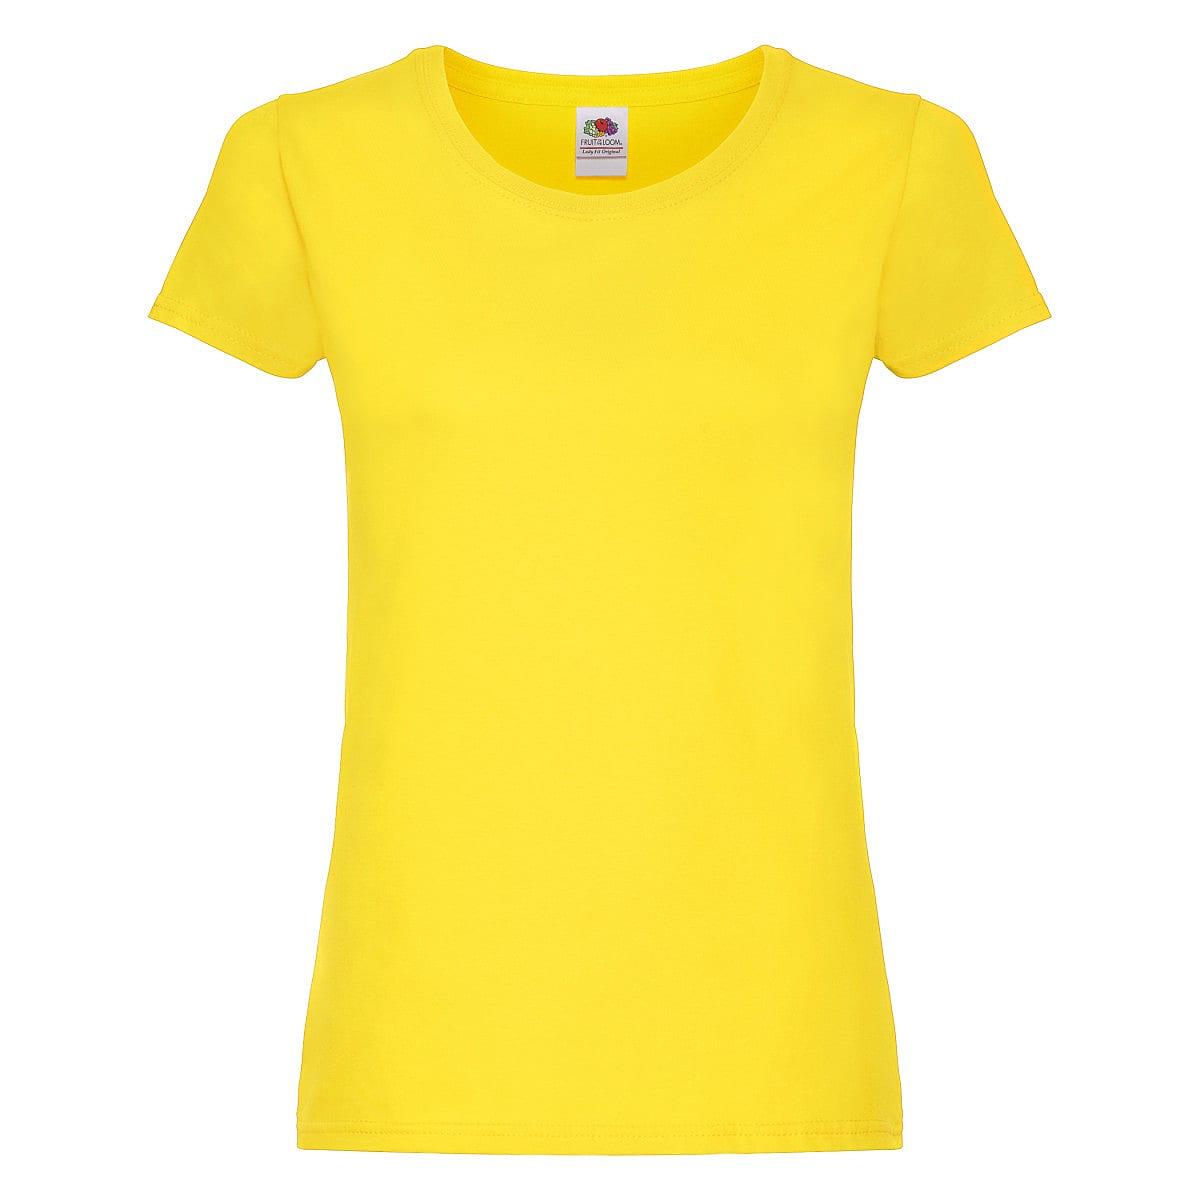 Fruit Of The Loom Lady Fit Original T-Shirt in Yellow (Product Code: 61420)